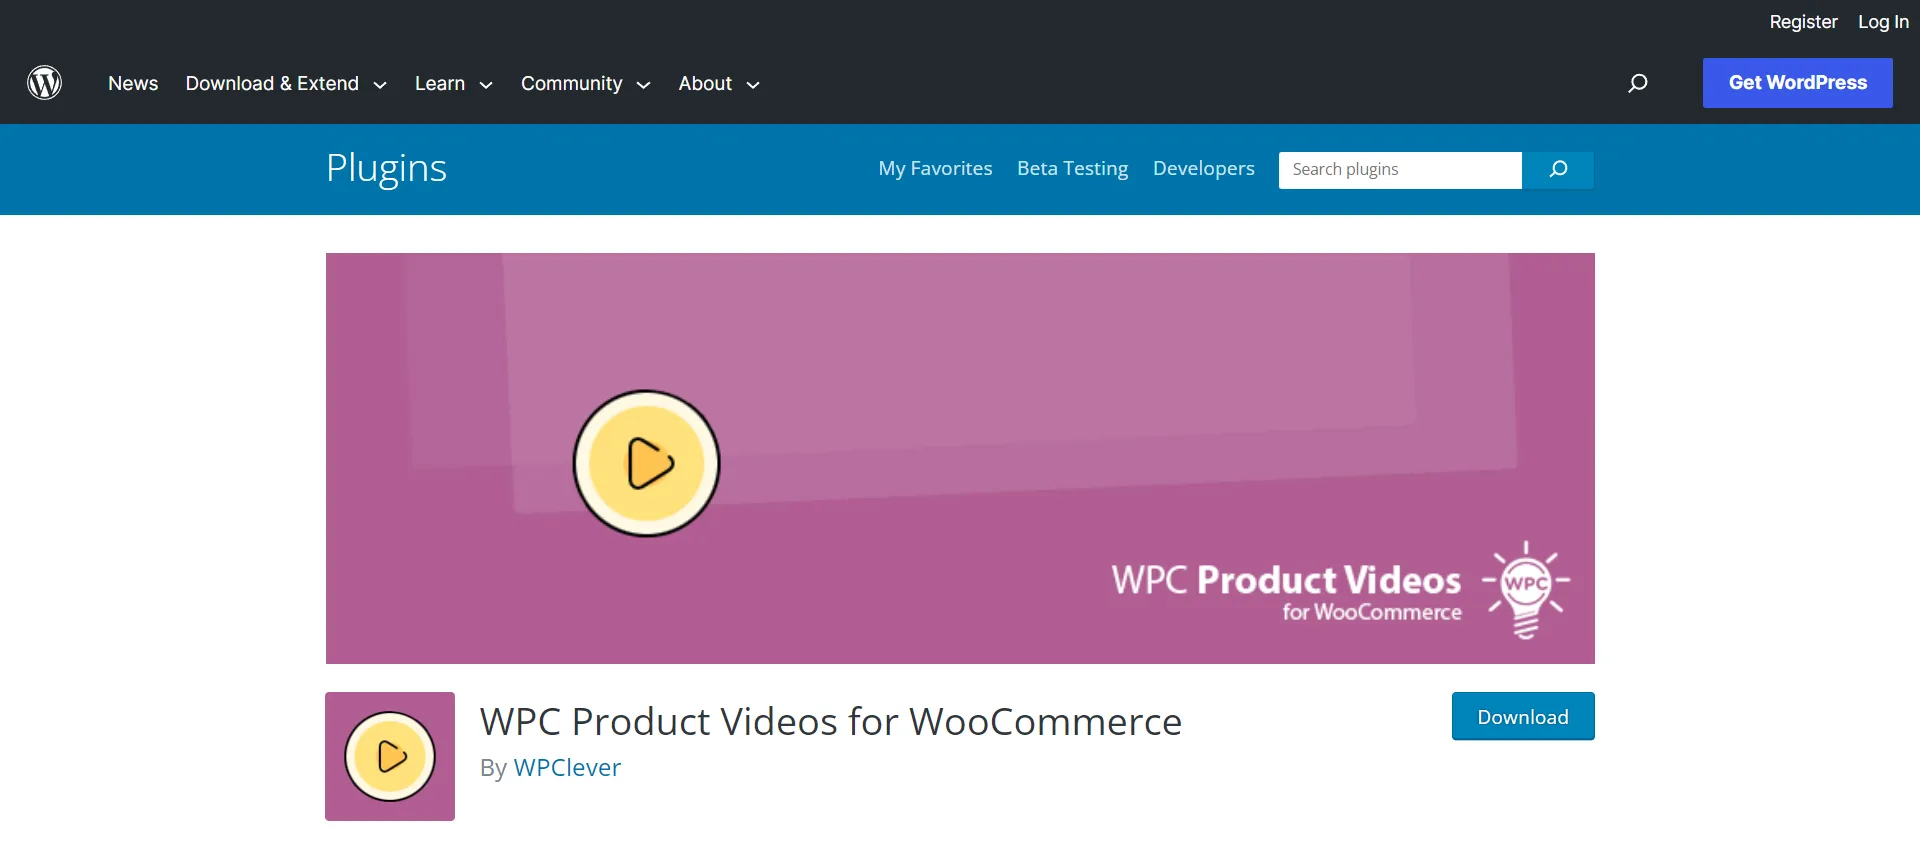 WPC Product Videos for WooCommerce Plugin